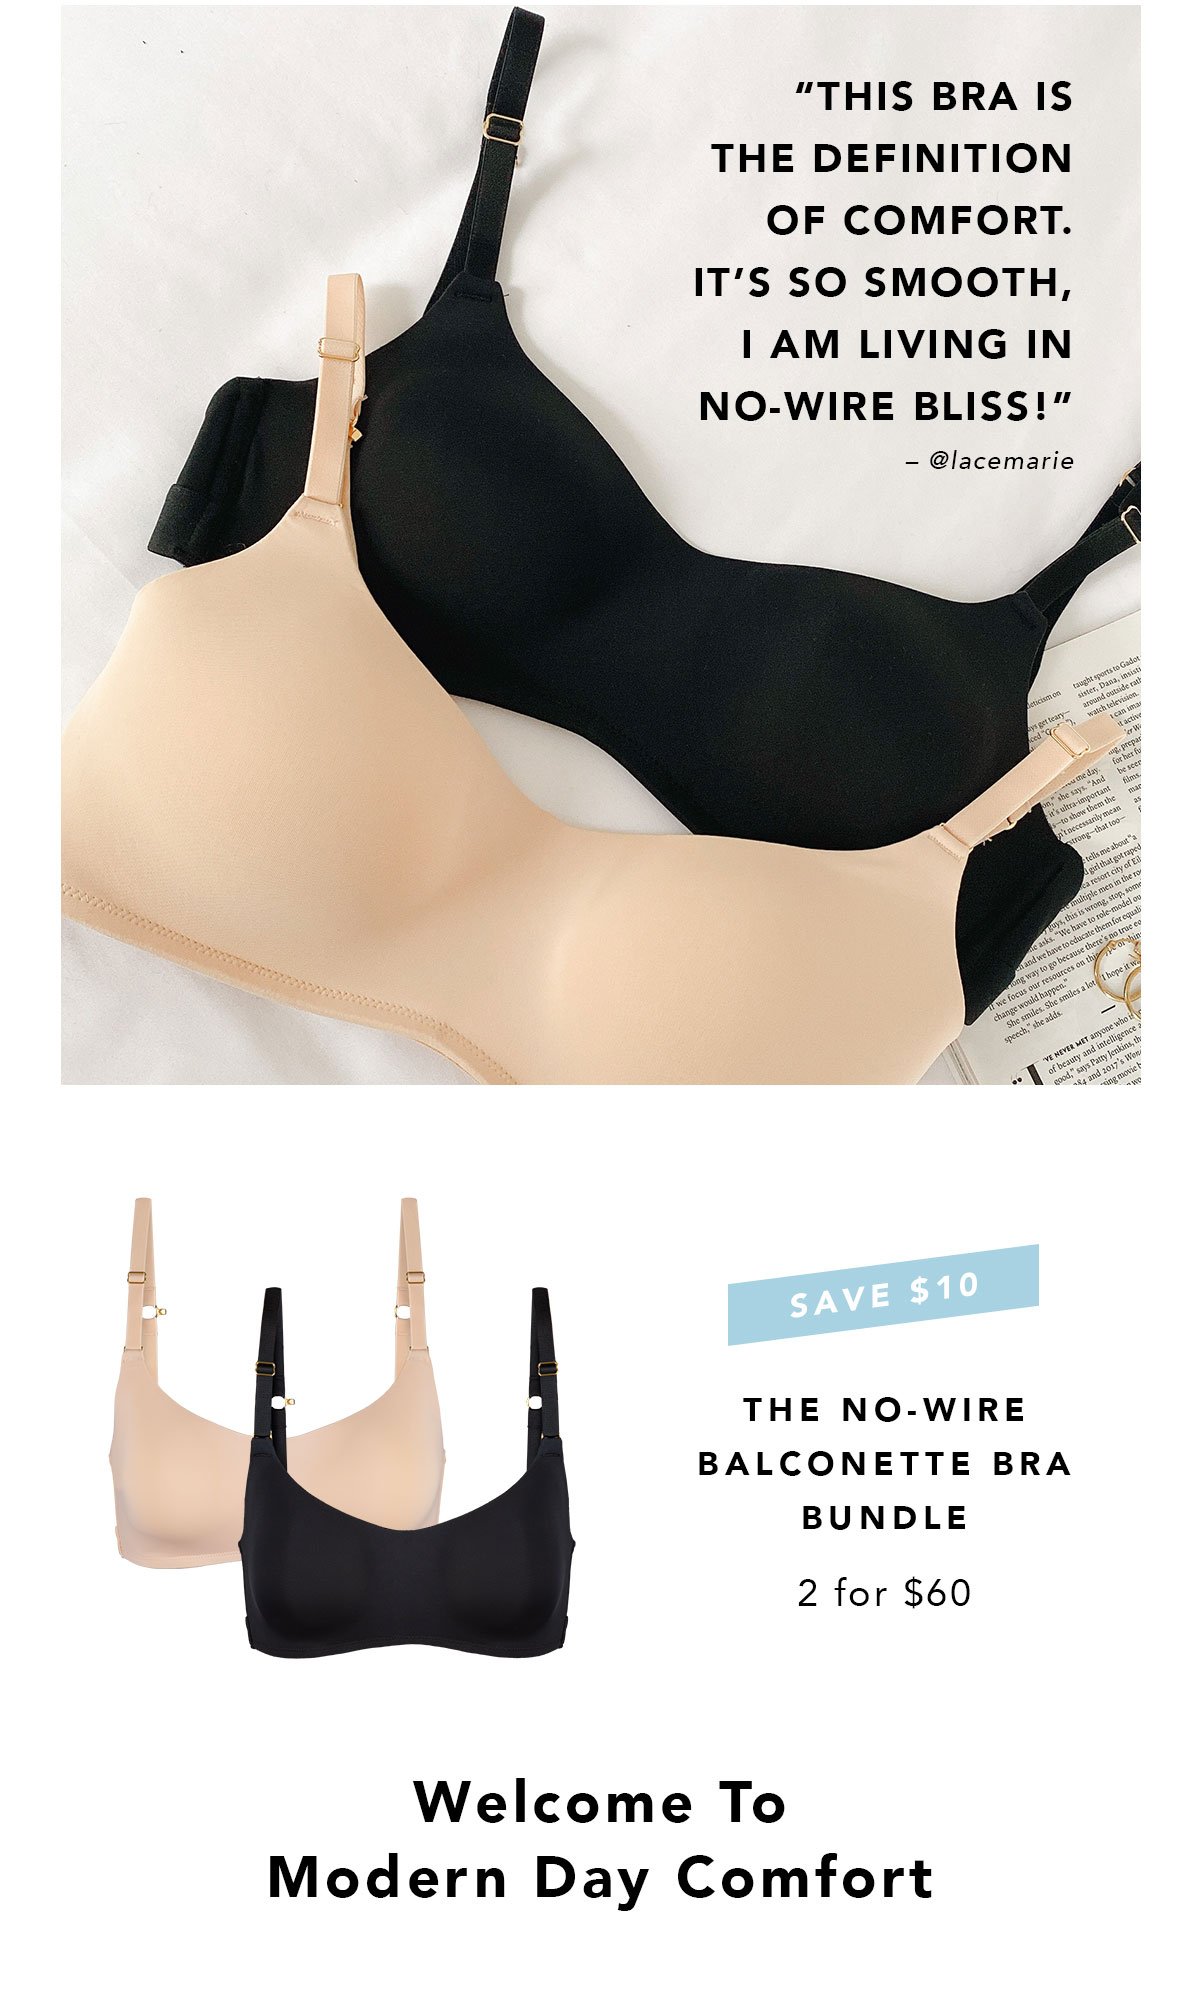 Lively: This Bra Is The Definition Of Comfort